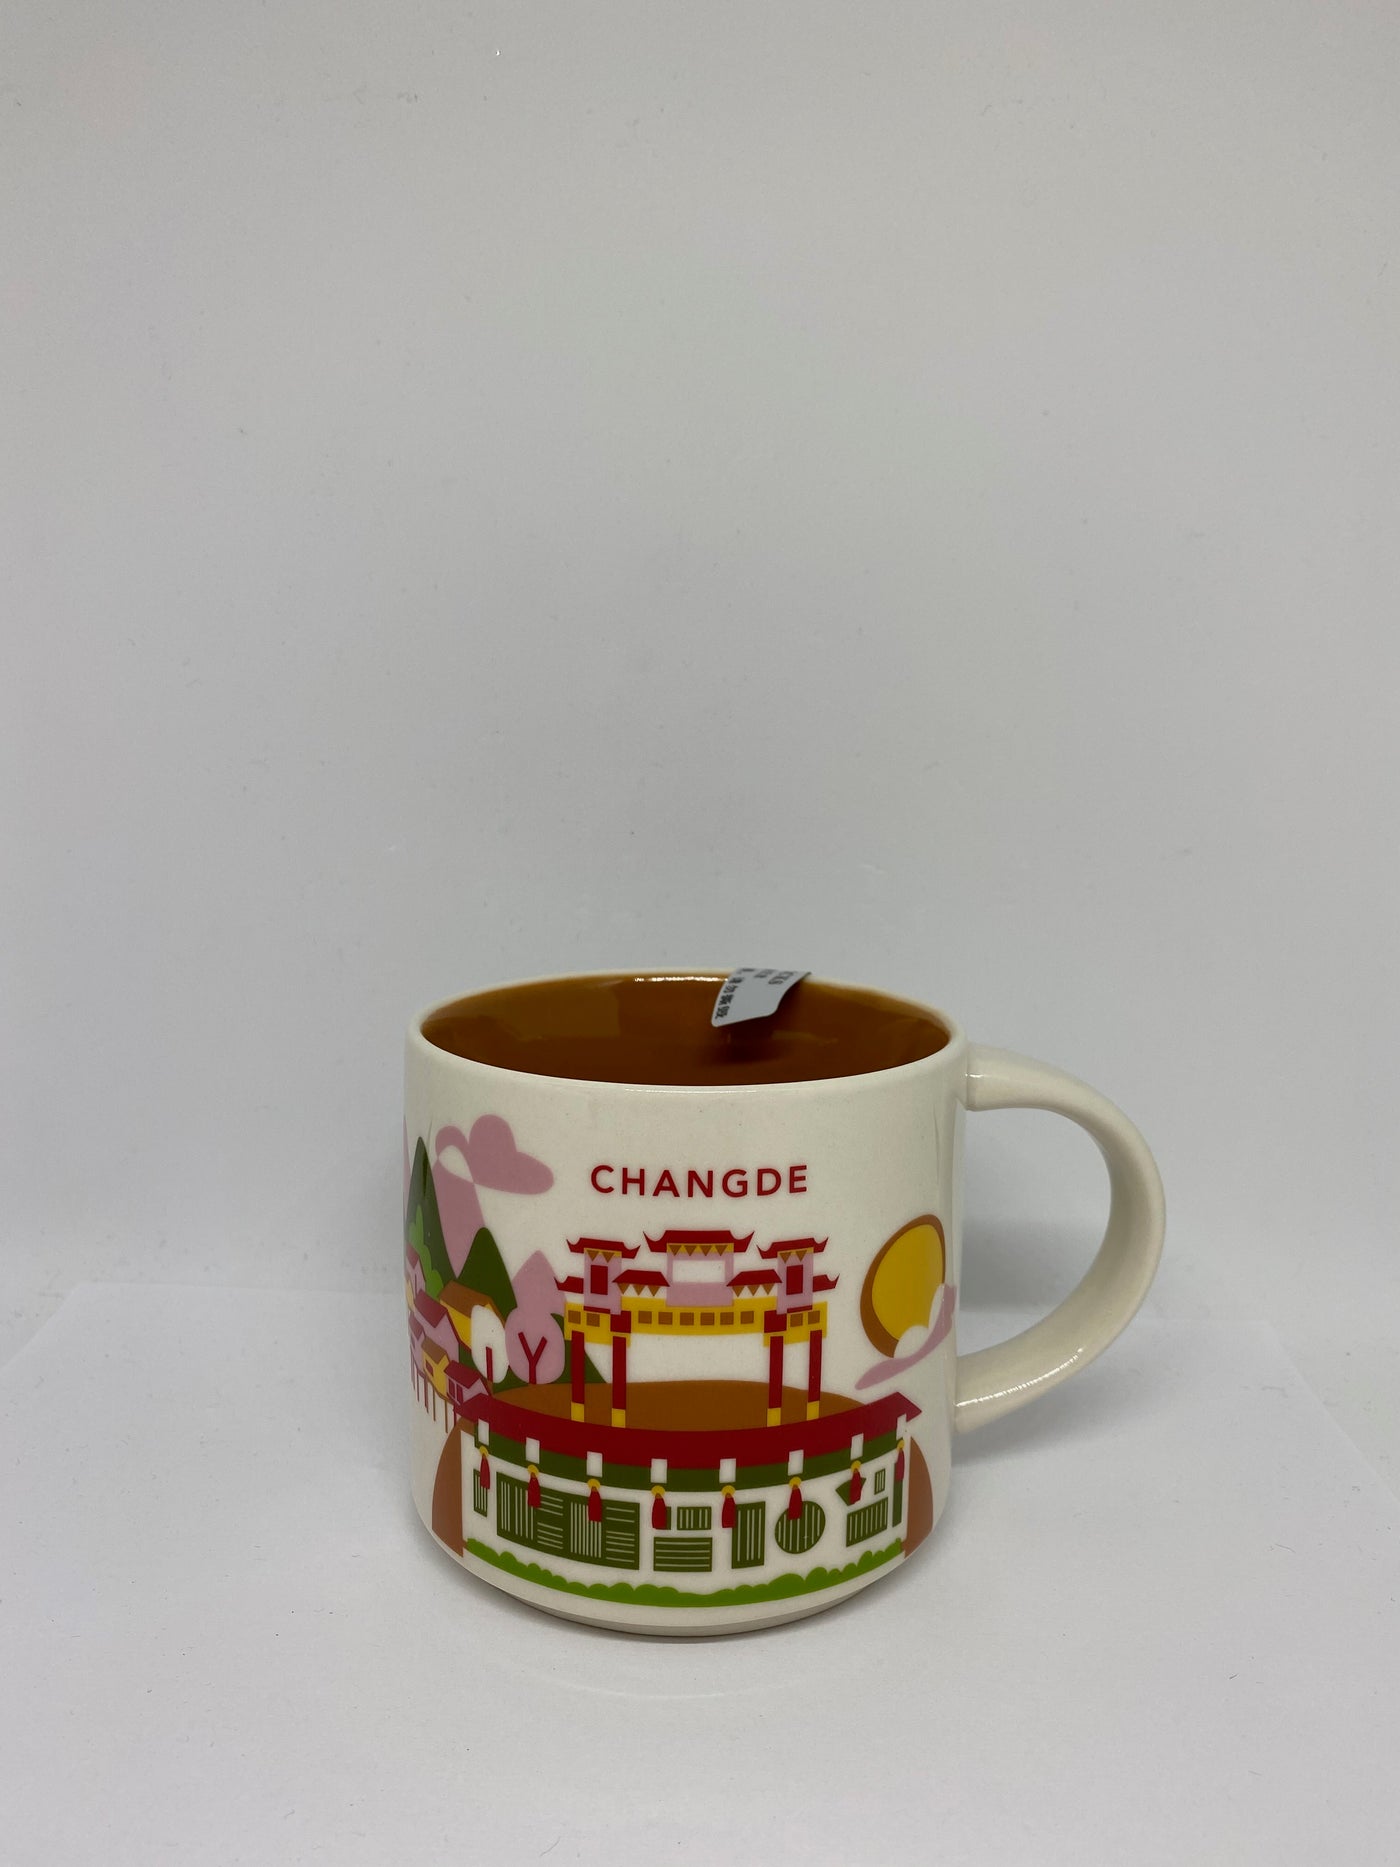 Starbucks You Are Here Collection Changde China Ceramic Coffee Mug New With Box